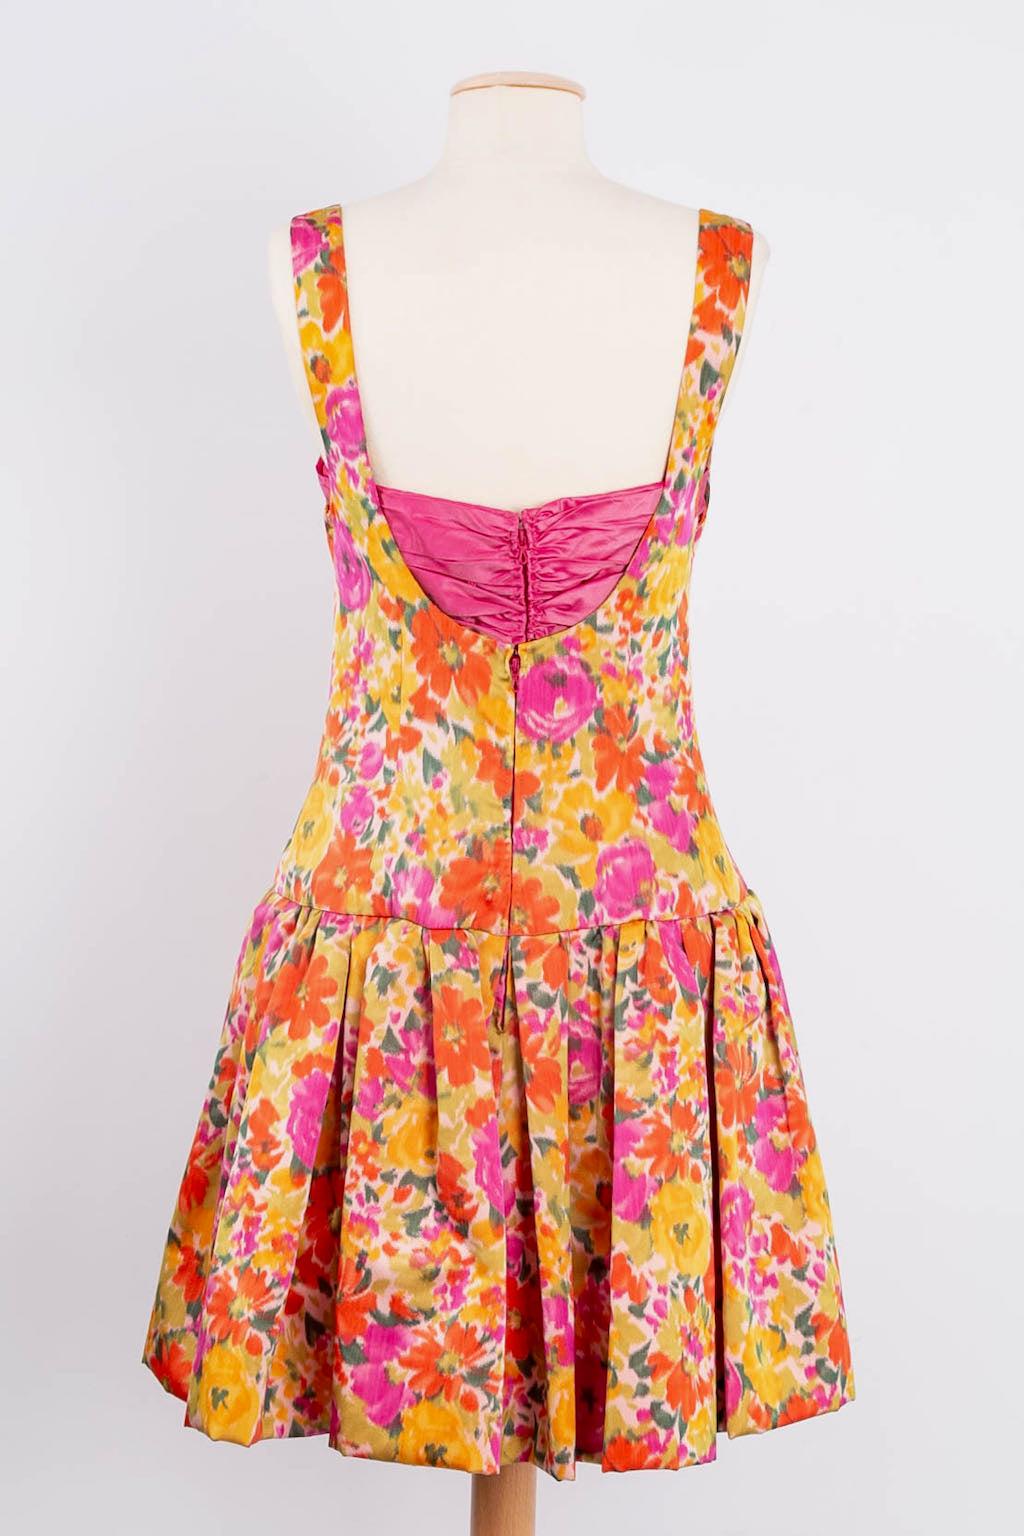 Nina Ricci Flower Silk Dress and its Stole For Sale 2